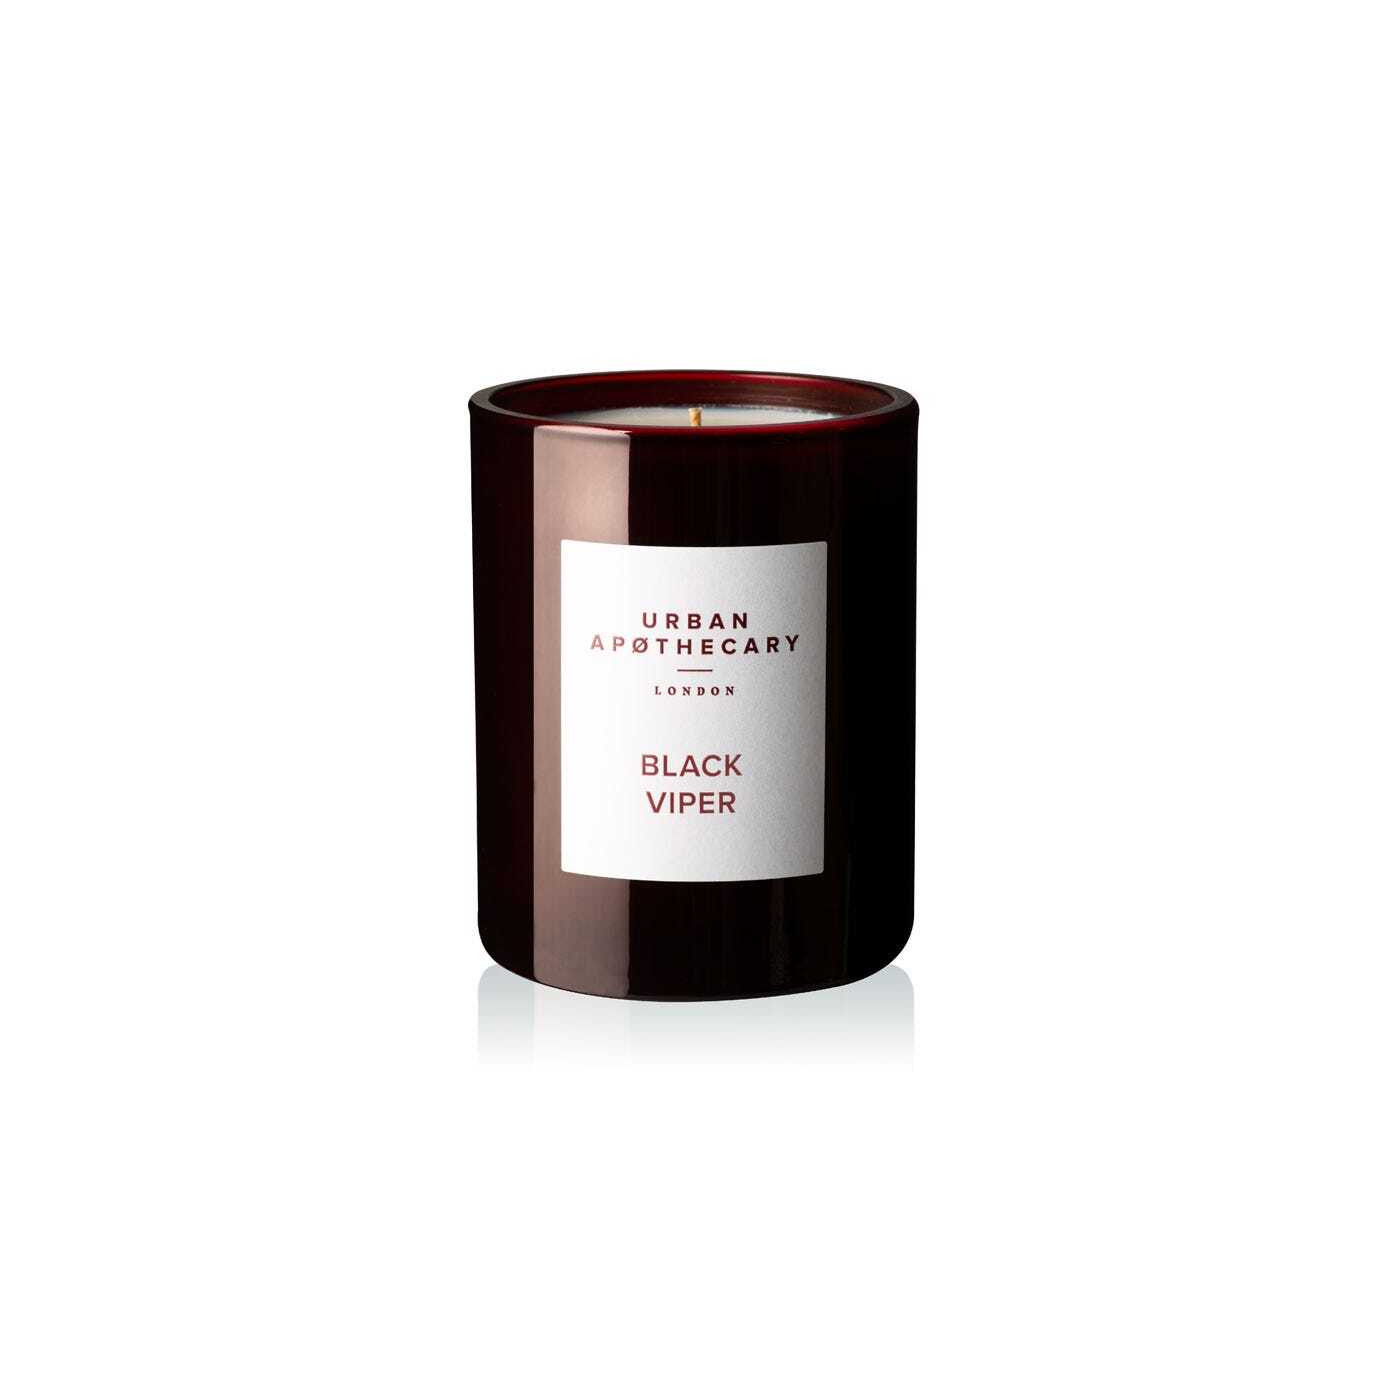 Urban Apothecary Black Viper Ruby Candle - image 1